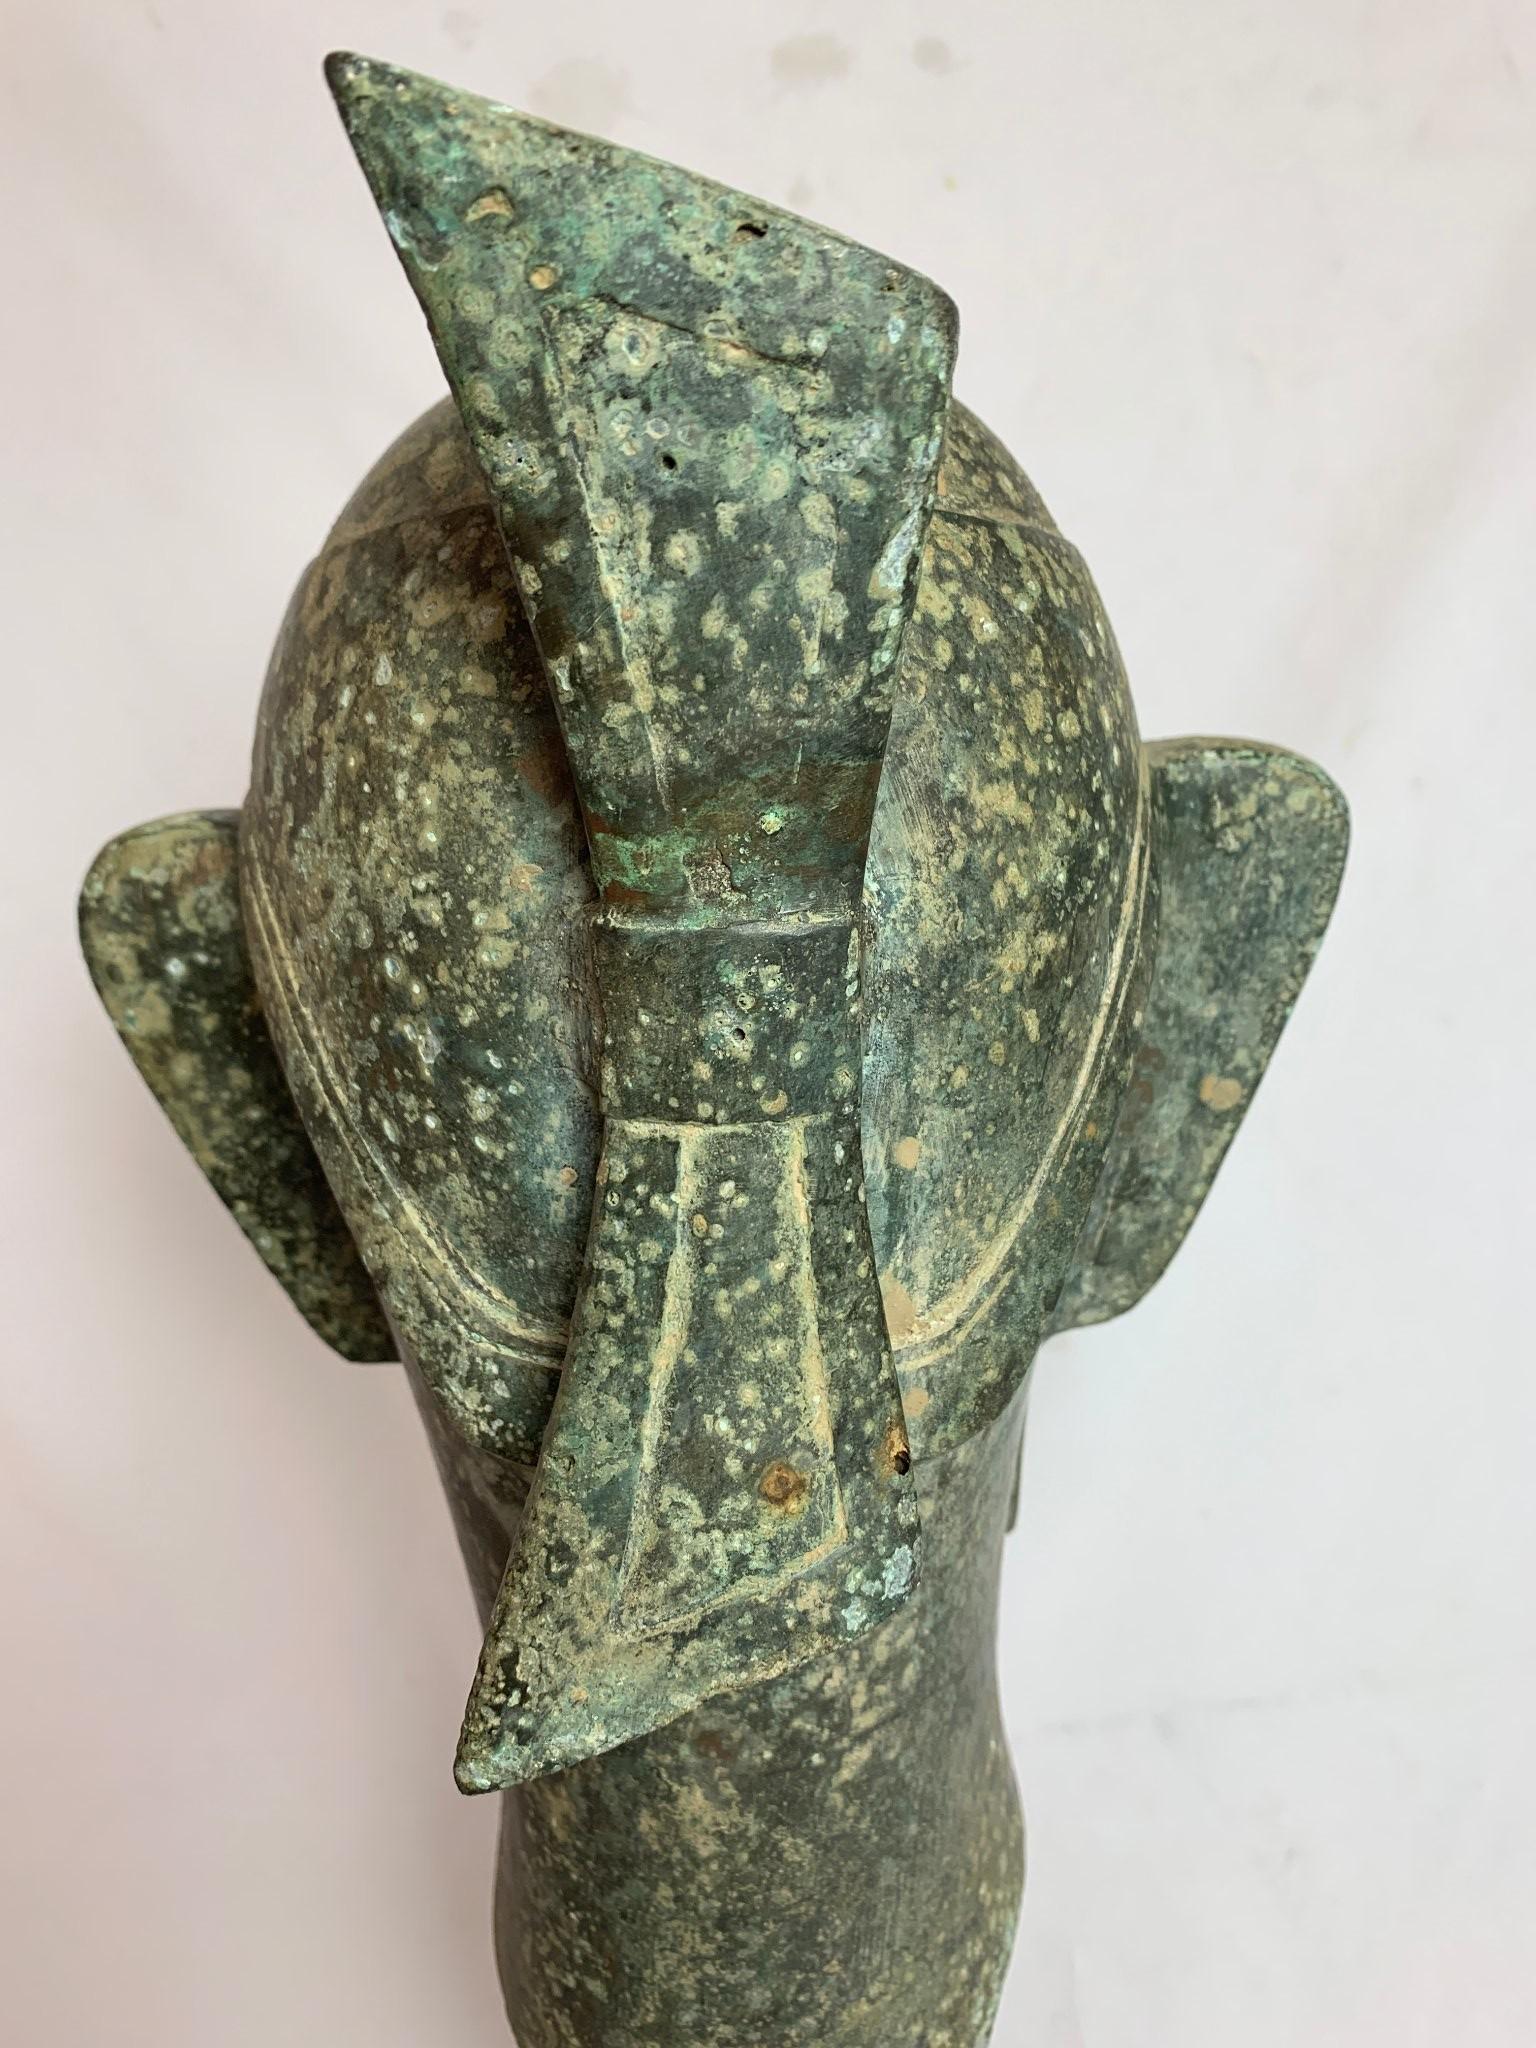 Tribal Chinese metal head sculpture on wooden pedestal, 1930s, possibly Sanxingdui replica.